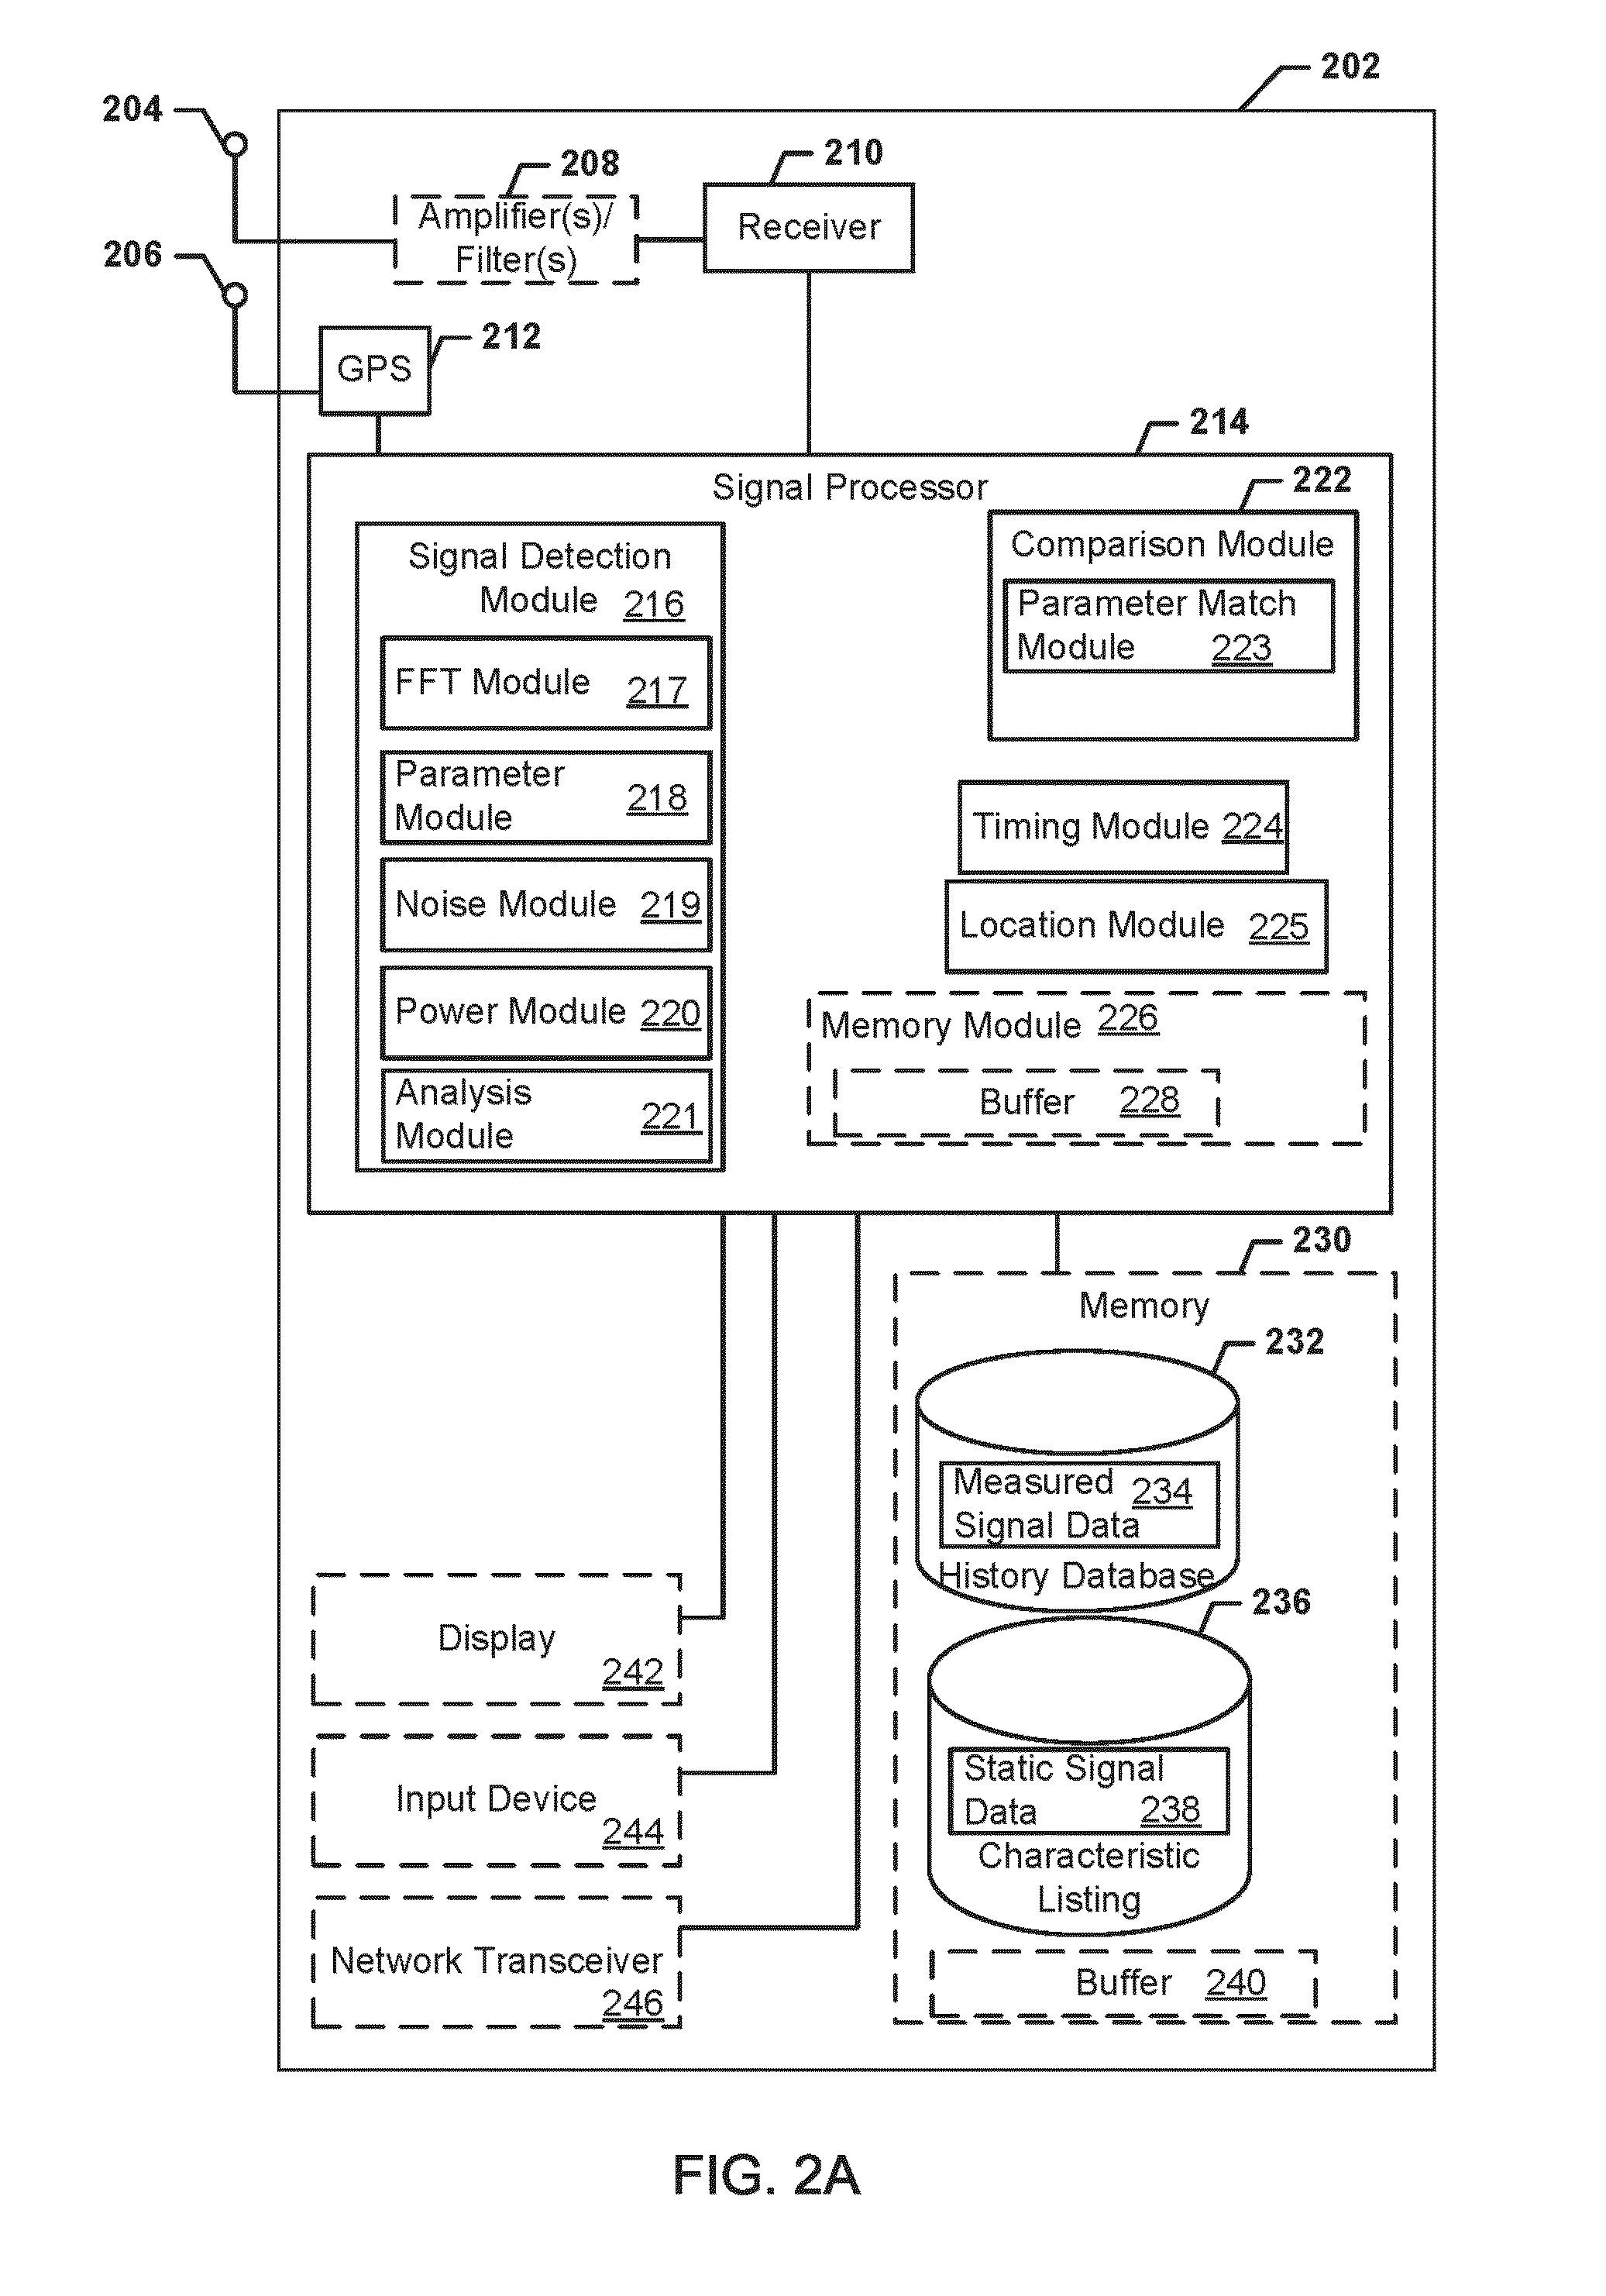 Systems, methods, and devices having databases for electronic spectrum management